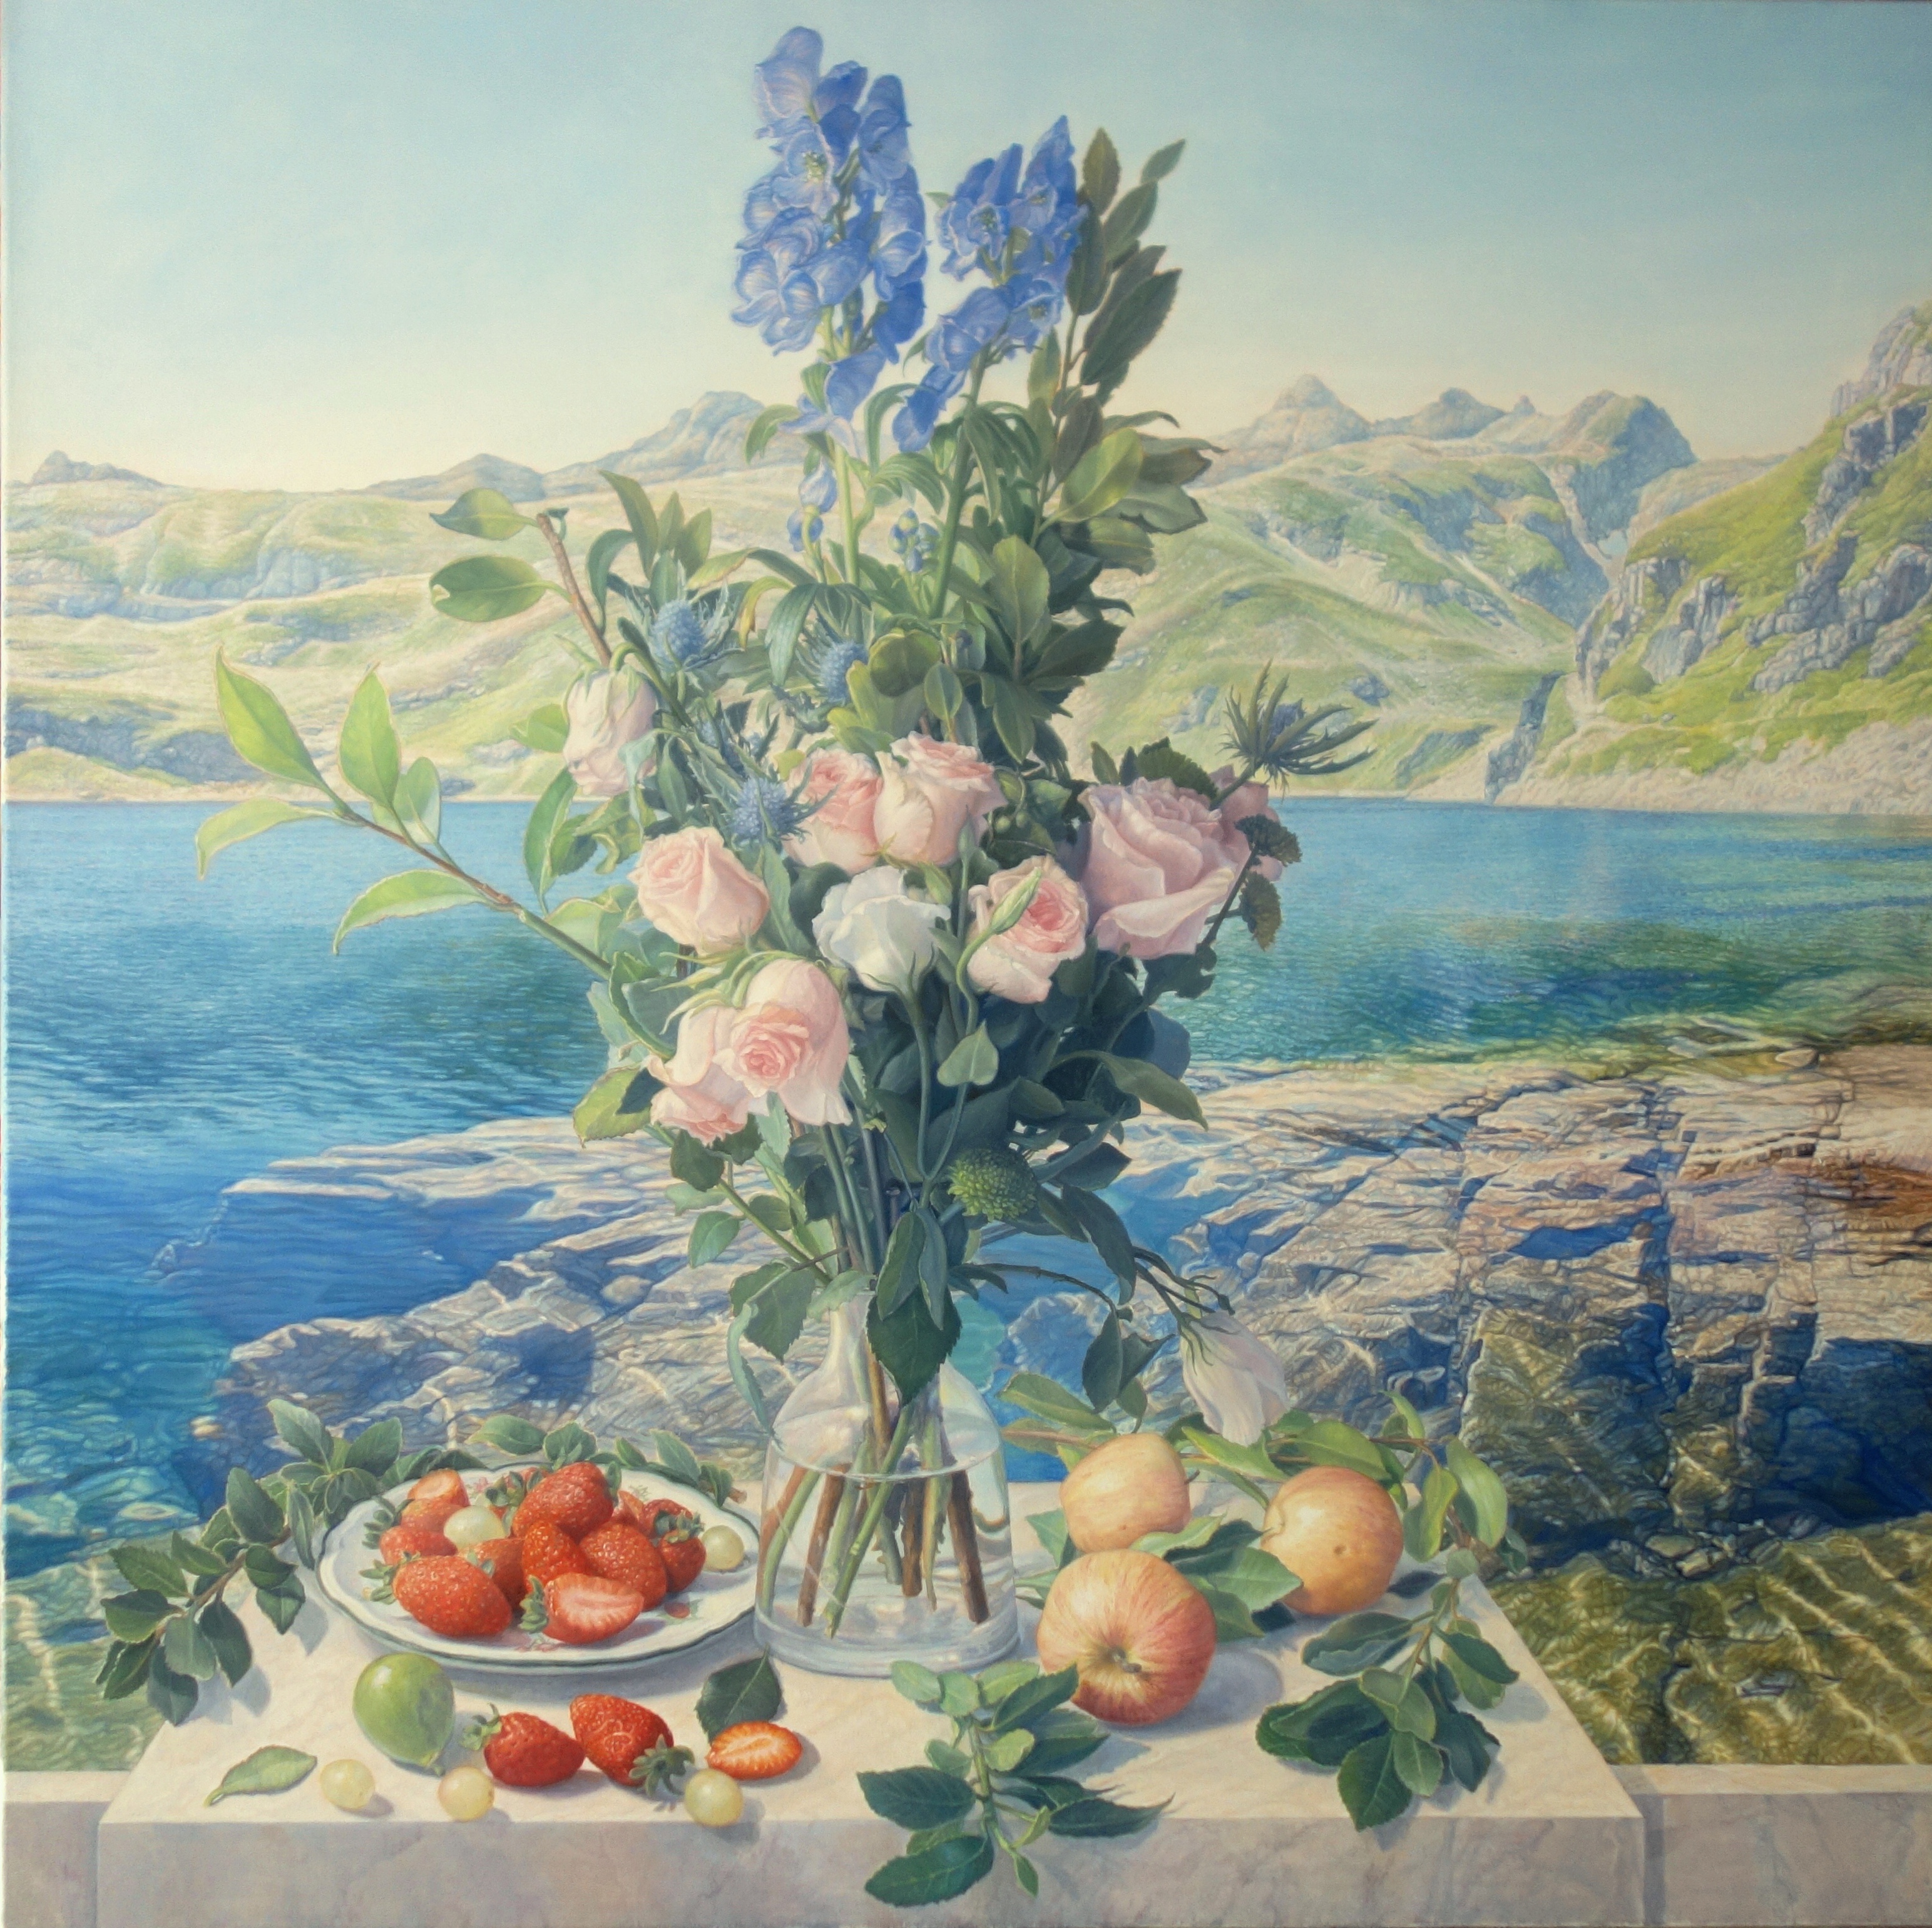 Roses and Strawberries in the lake,2022 | acrylic and oil on canvas, 31.49x31.49in